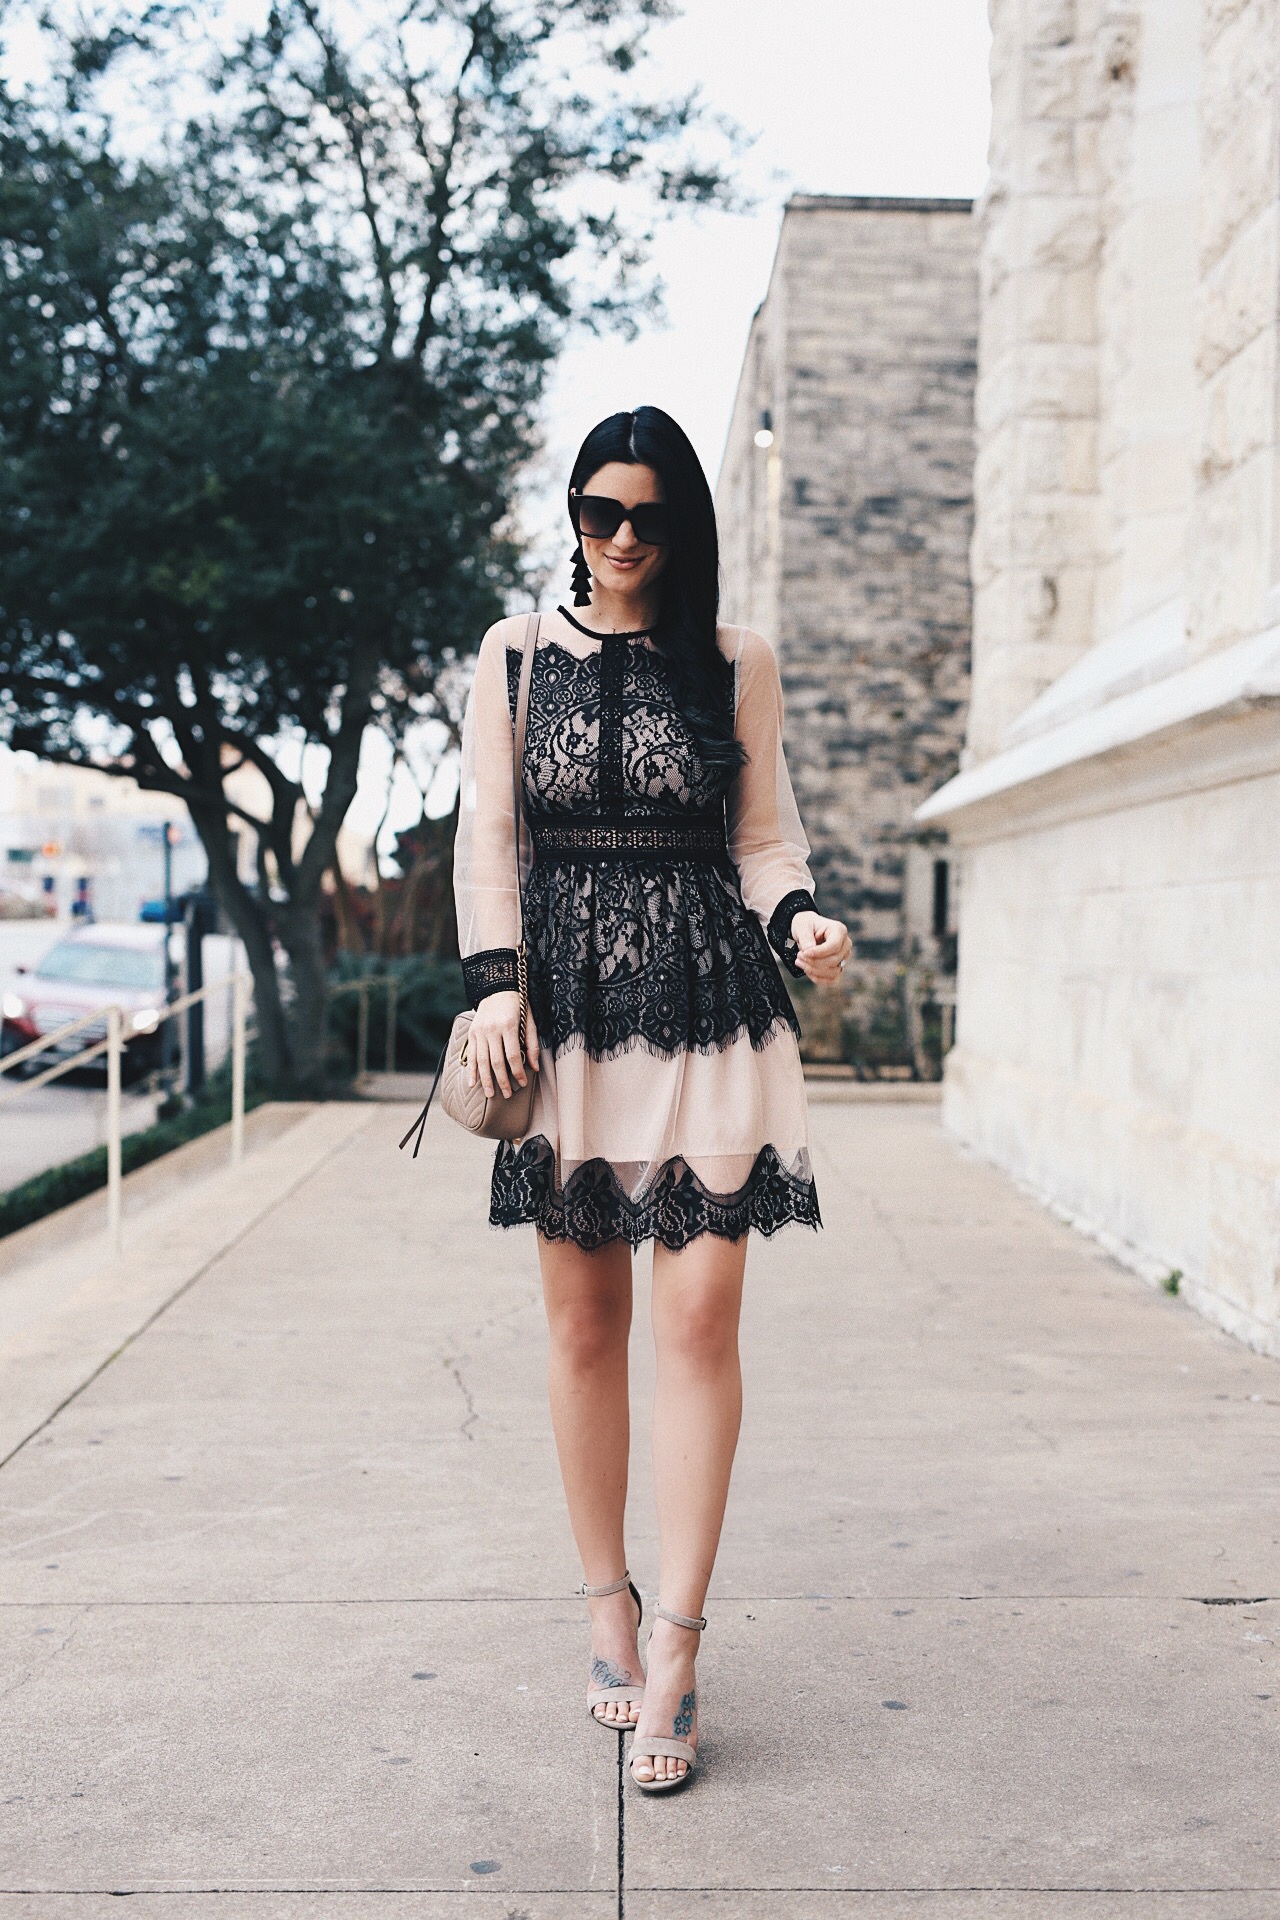 DTKAustin shares the perfect, lightweight dress that you can transition into summer for those cooler days. Gucci Marmont Small Beige Crossbody, Chicwish Dress - Sheer Black Lace Dress styled by popular Austin fashion blogger, Dressed to Kill